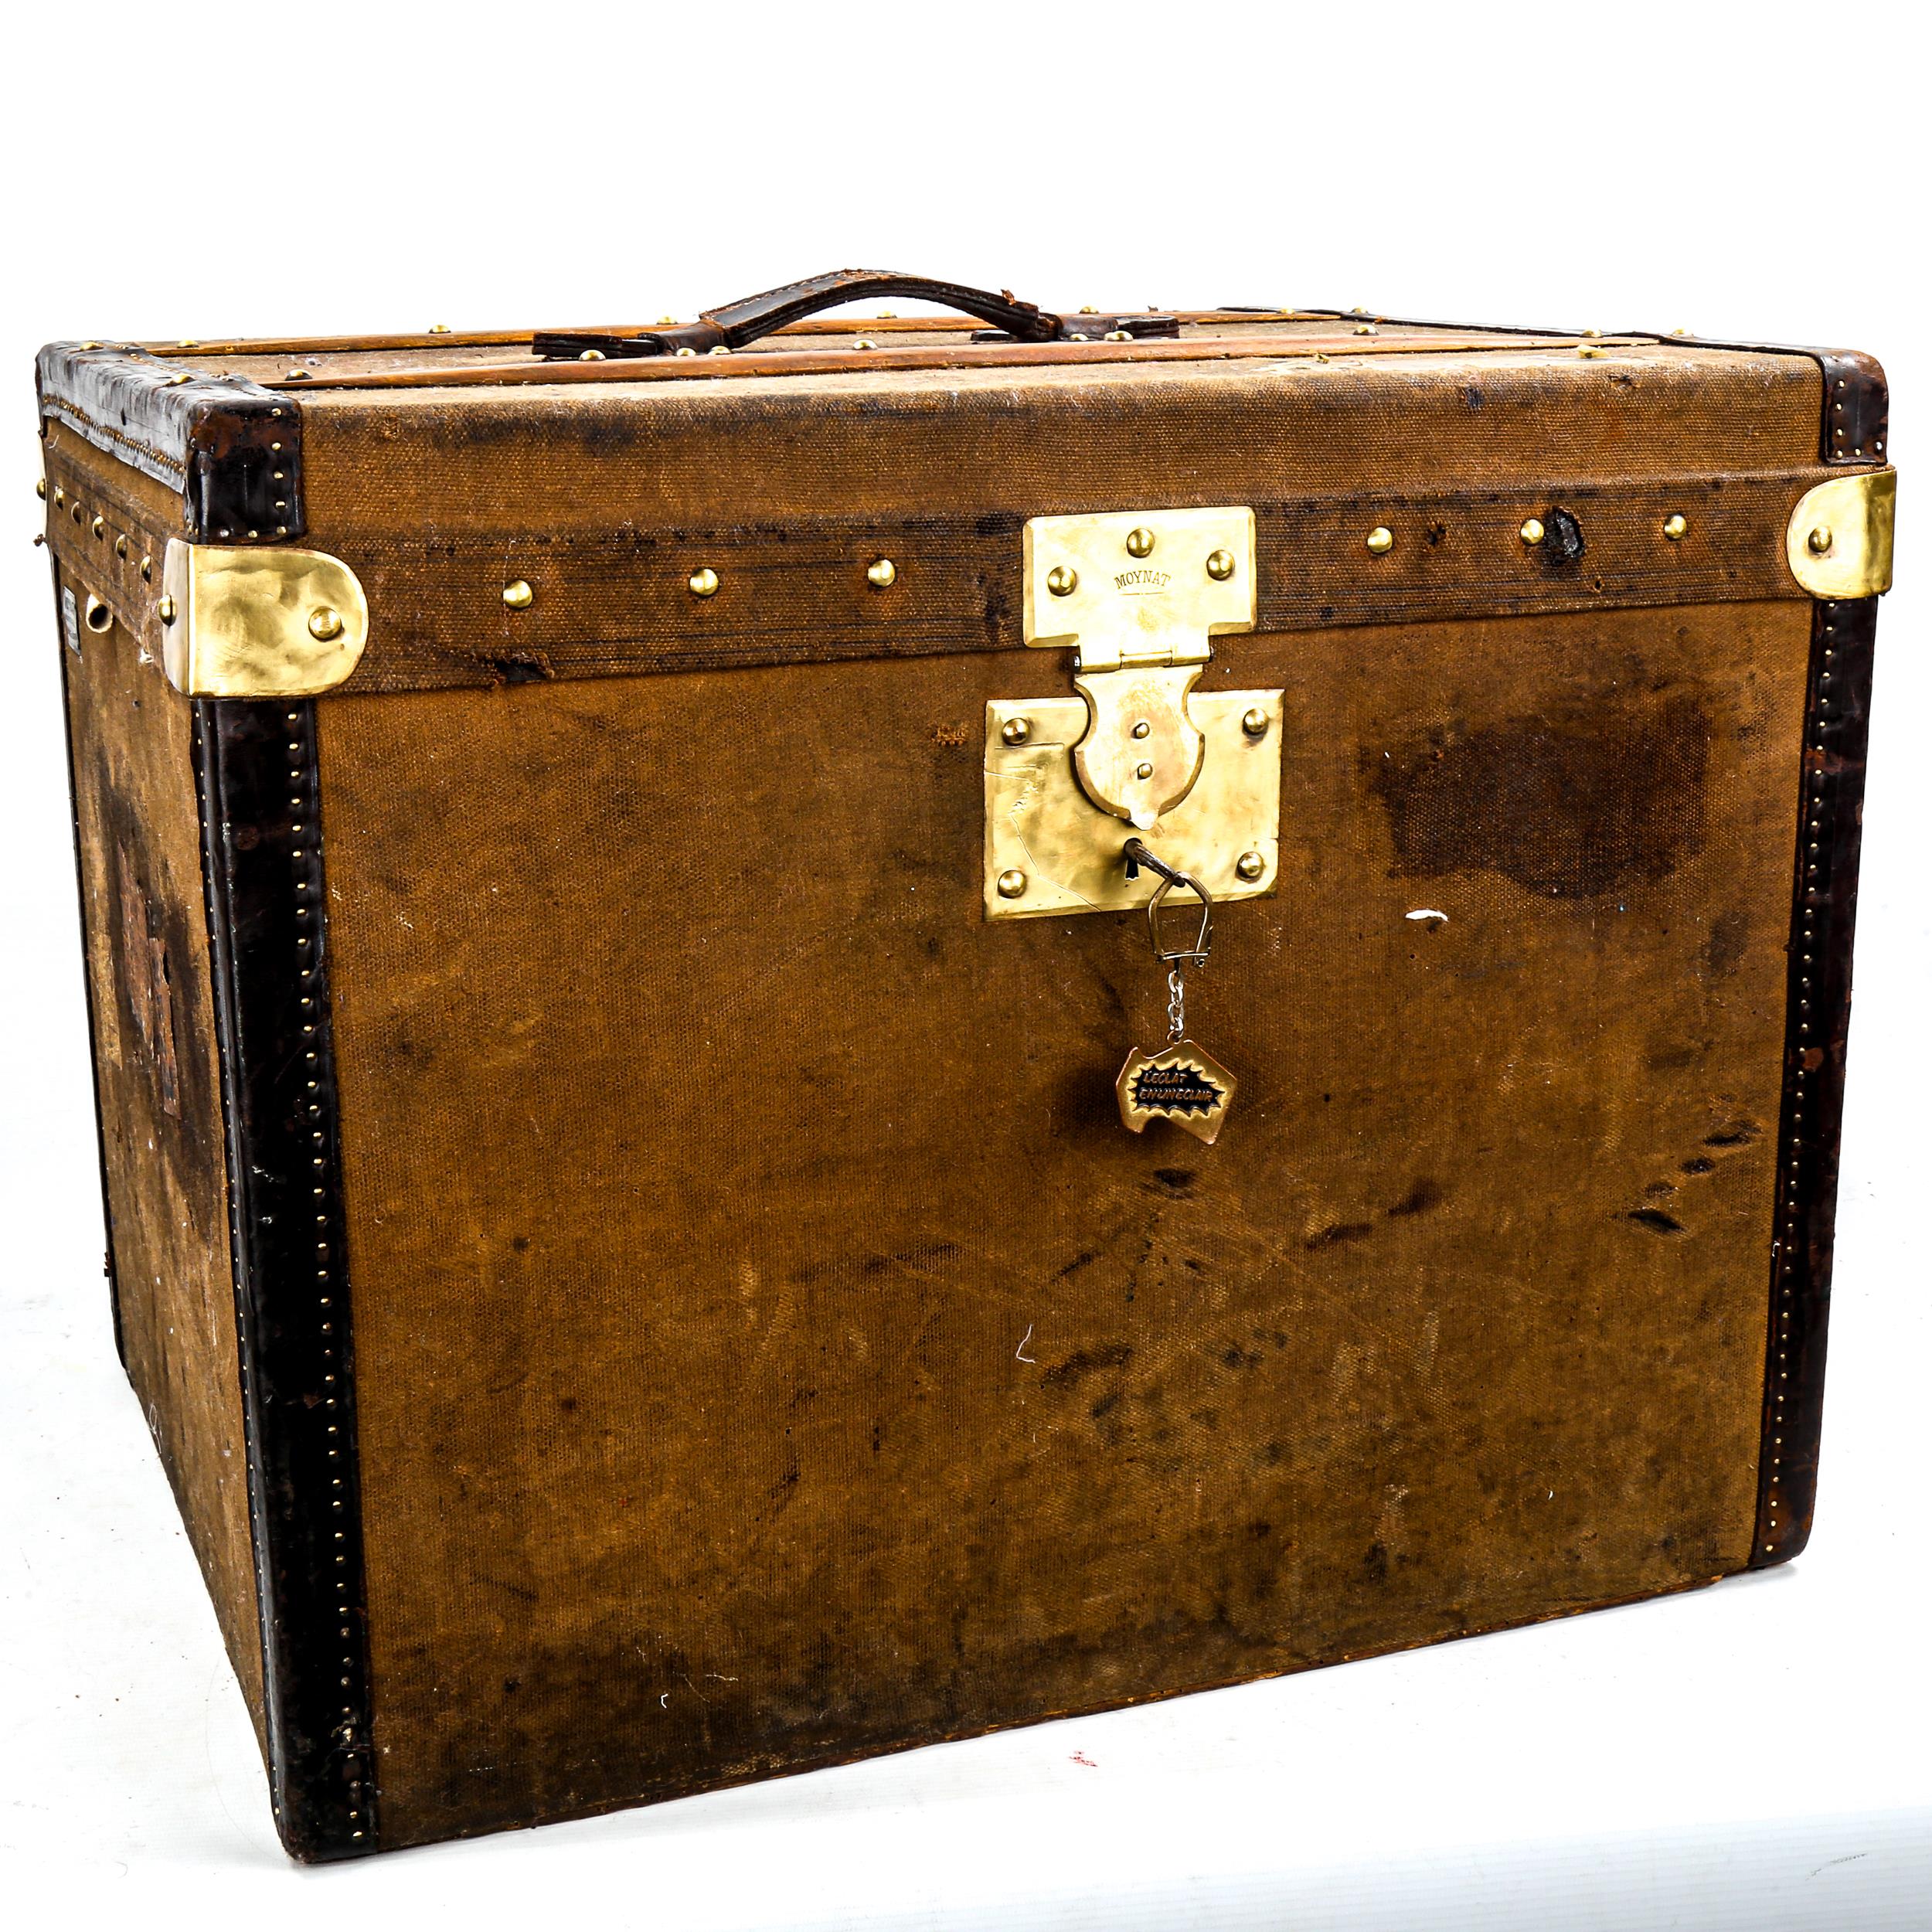 MOYNAT PARIS (now owned by LOUIS VUITTON) - a Vintage canvas-covered travelling trunk, with